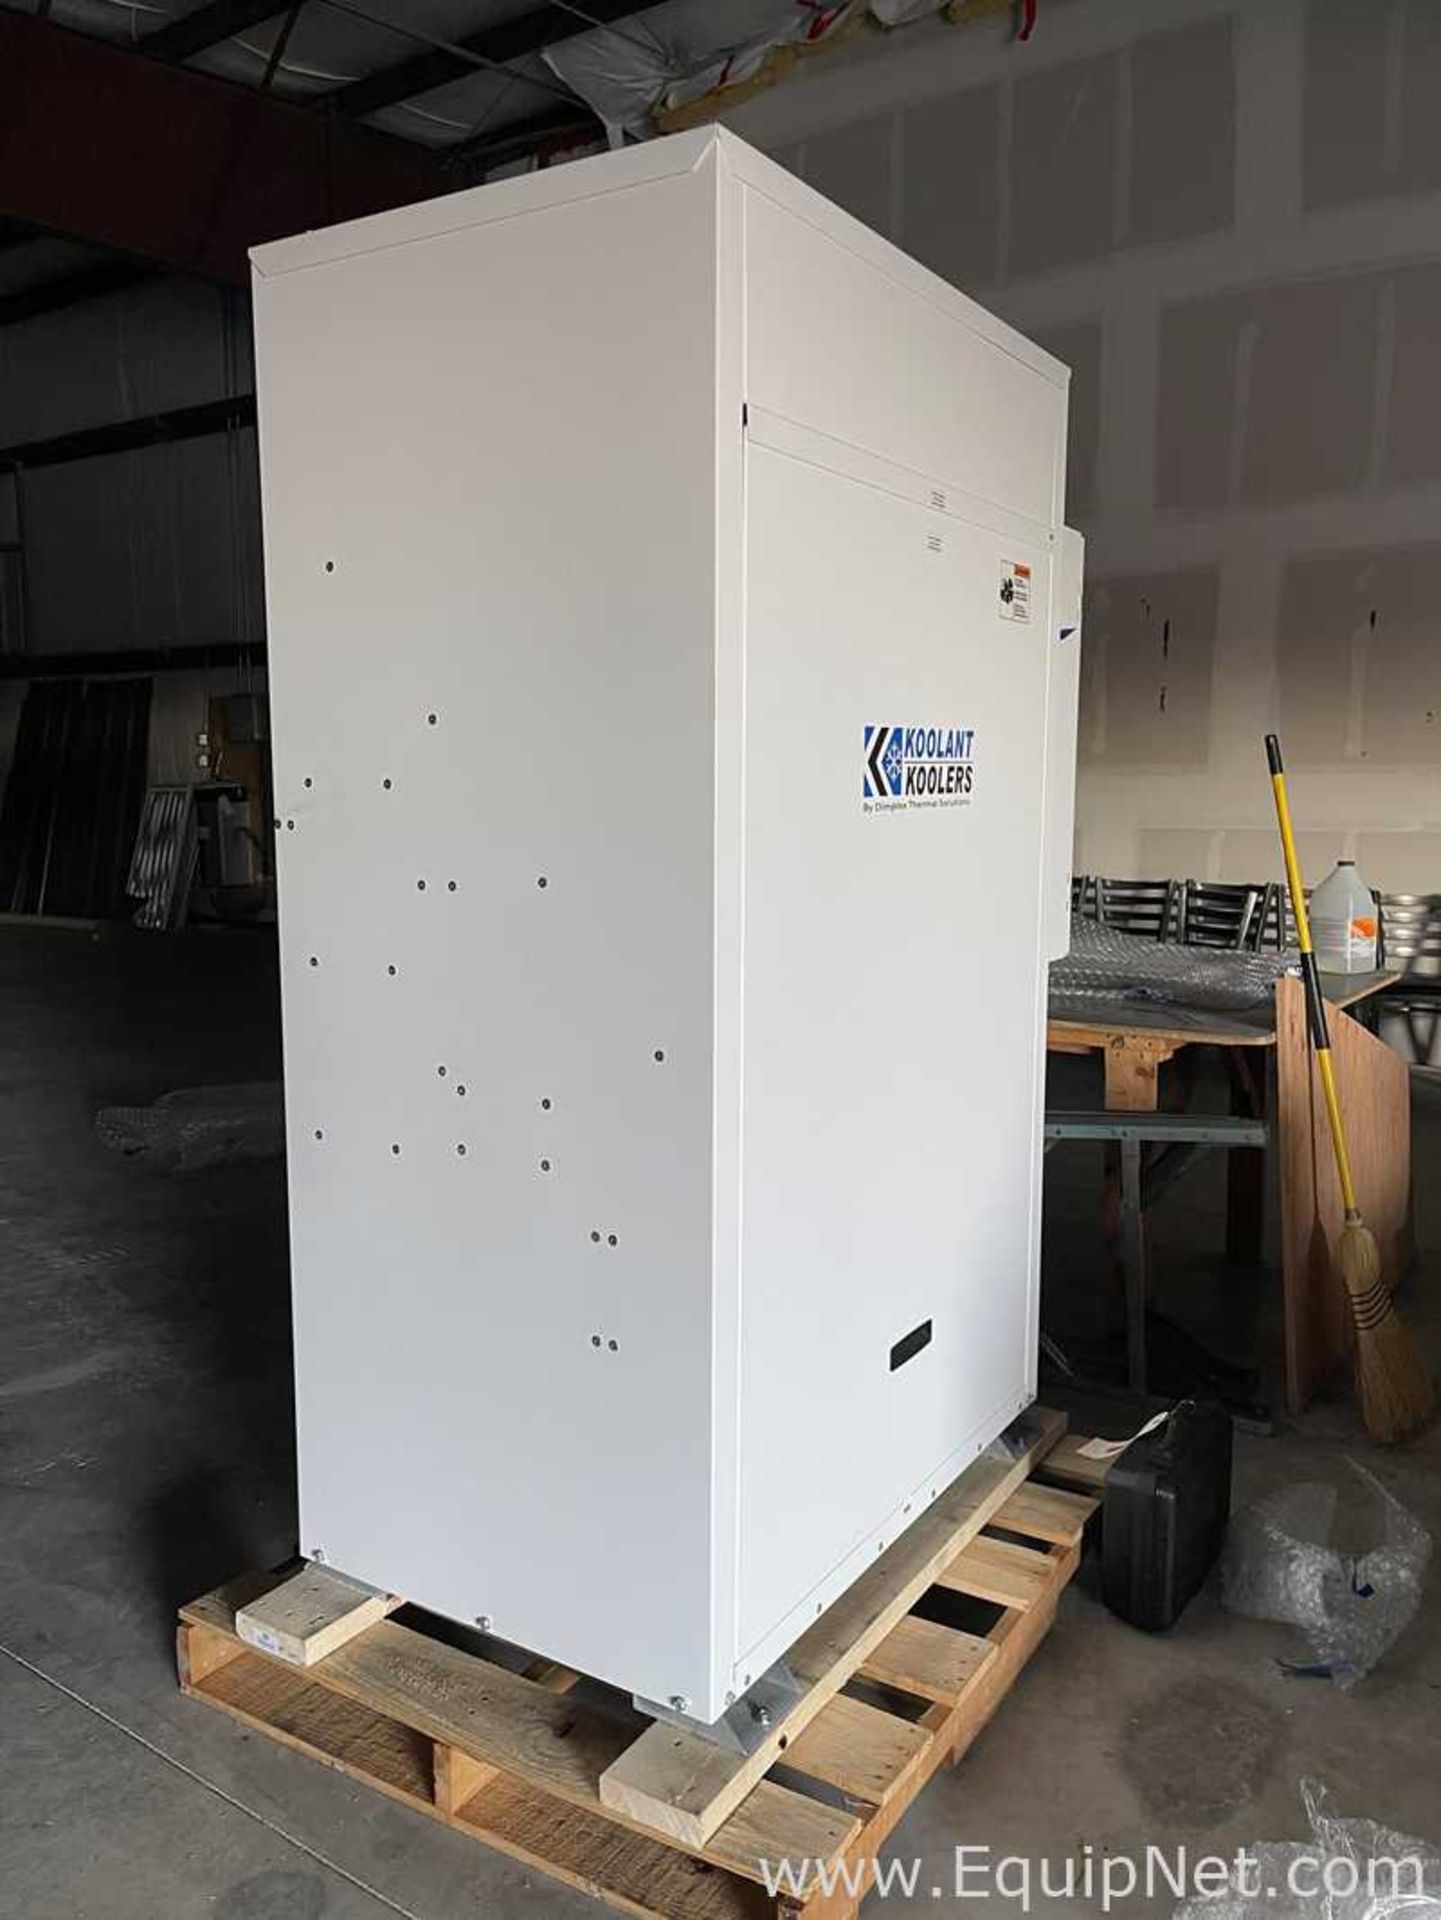 MRX Technologies XTR 20LE Supercritical CO2 Automated Extractor System - Image 8 of 10